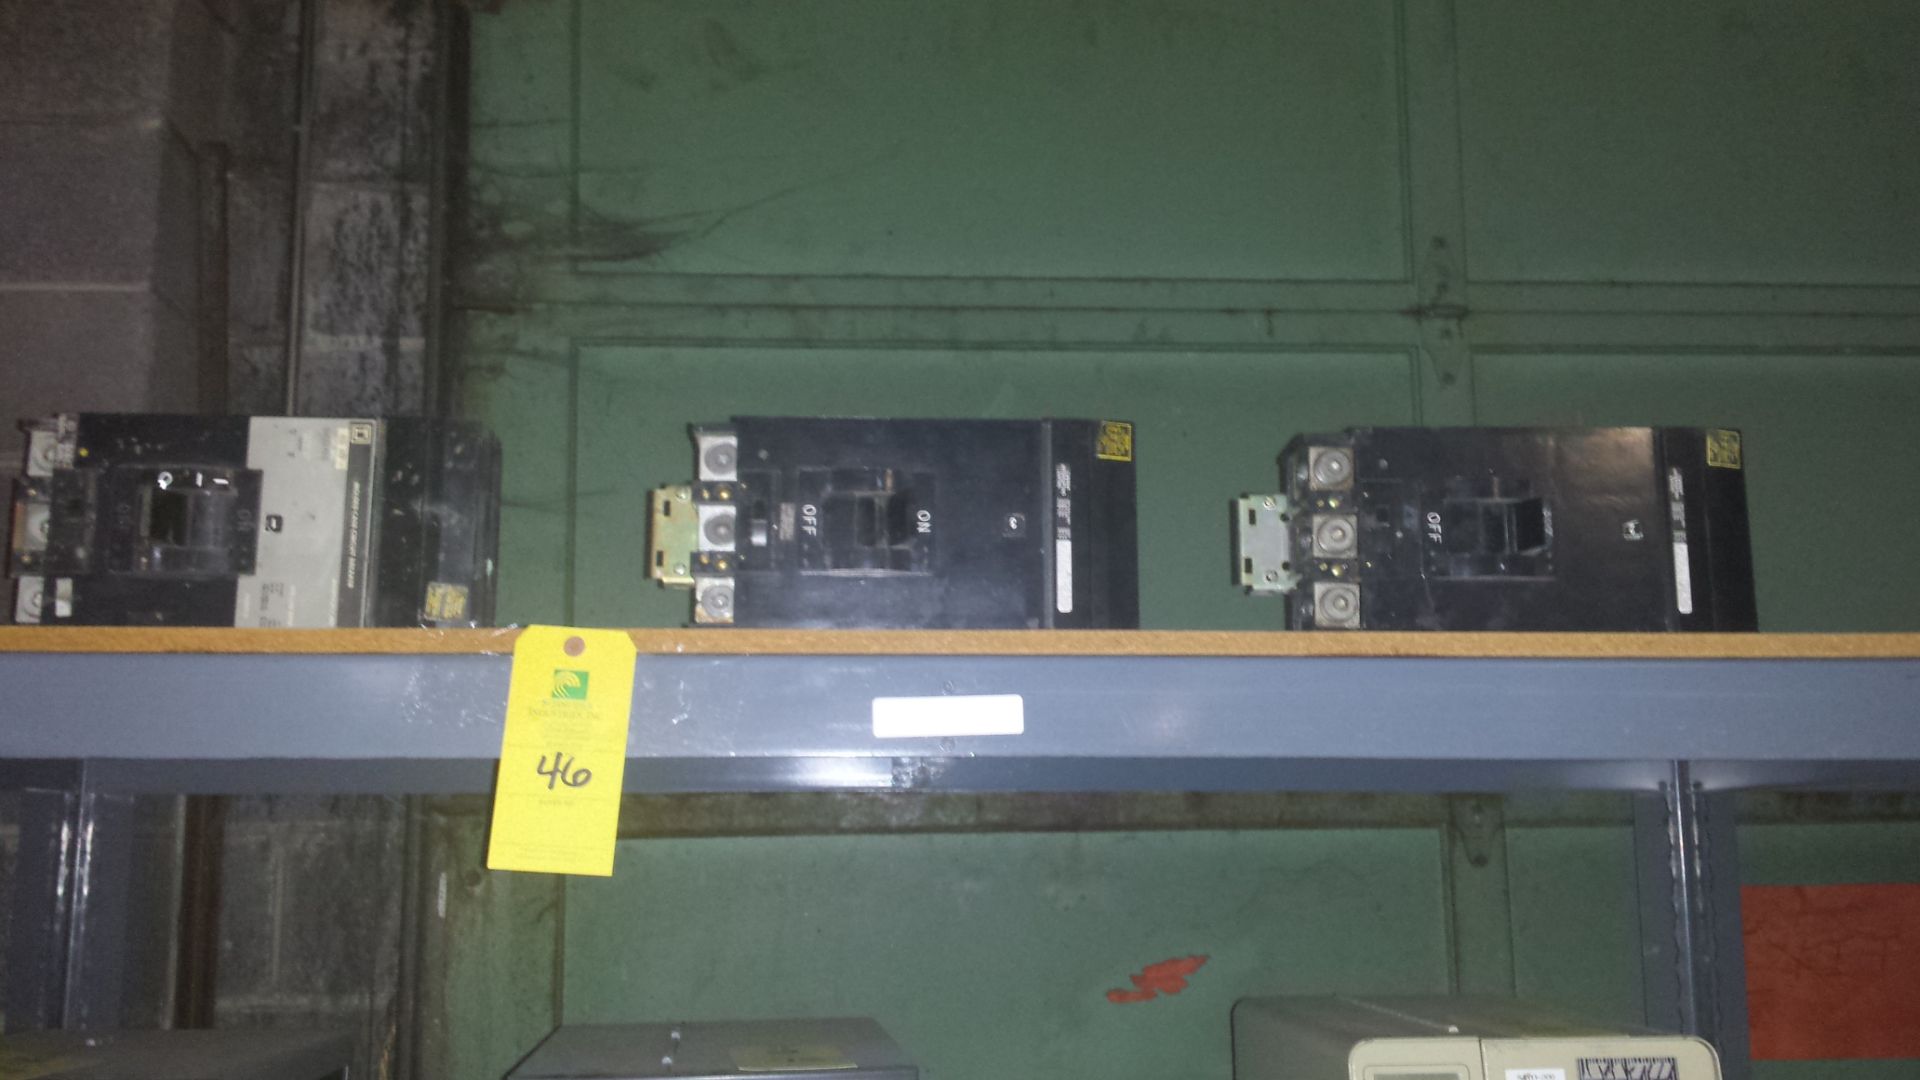 One Shelf of Square D Circuit Breakers Including: Q432400, 250 Amp, 300 Amp